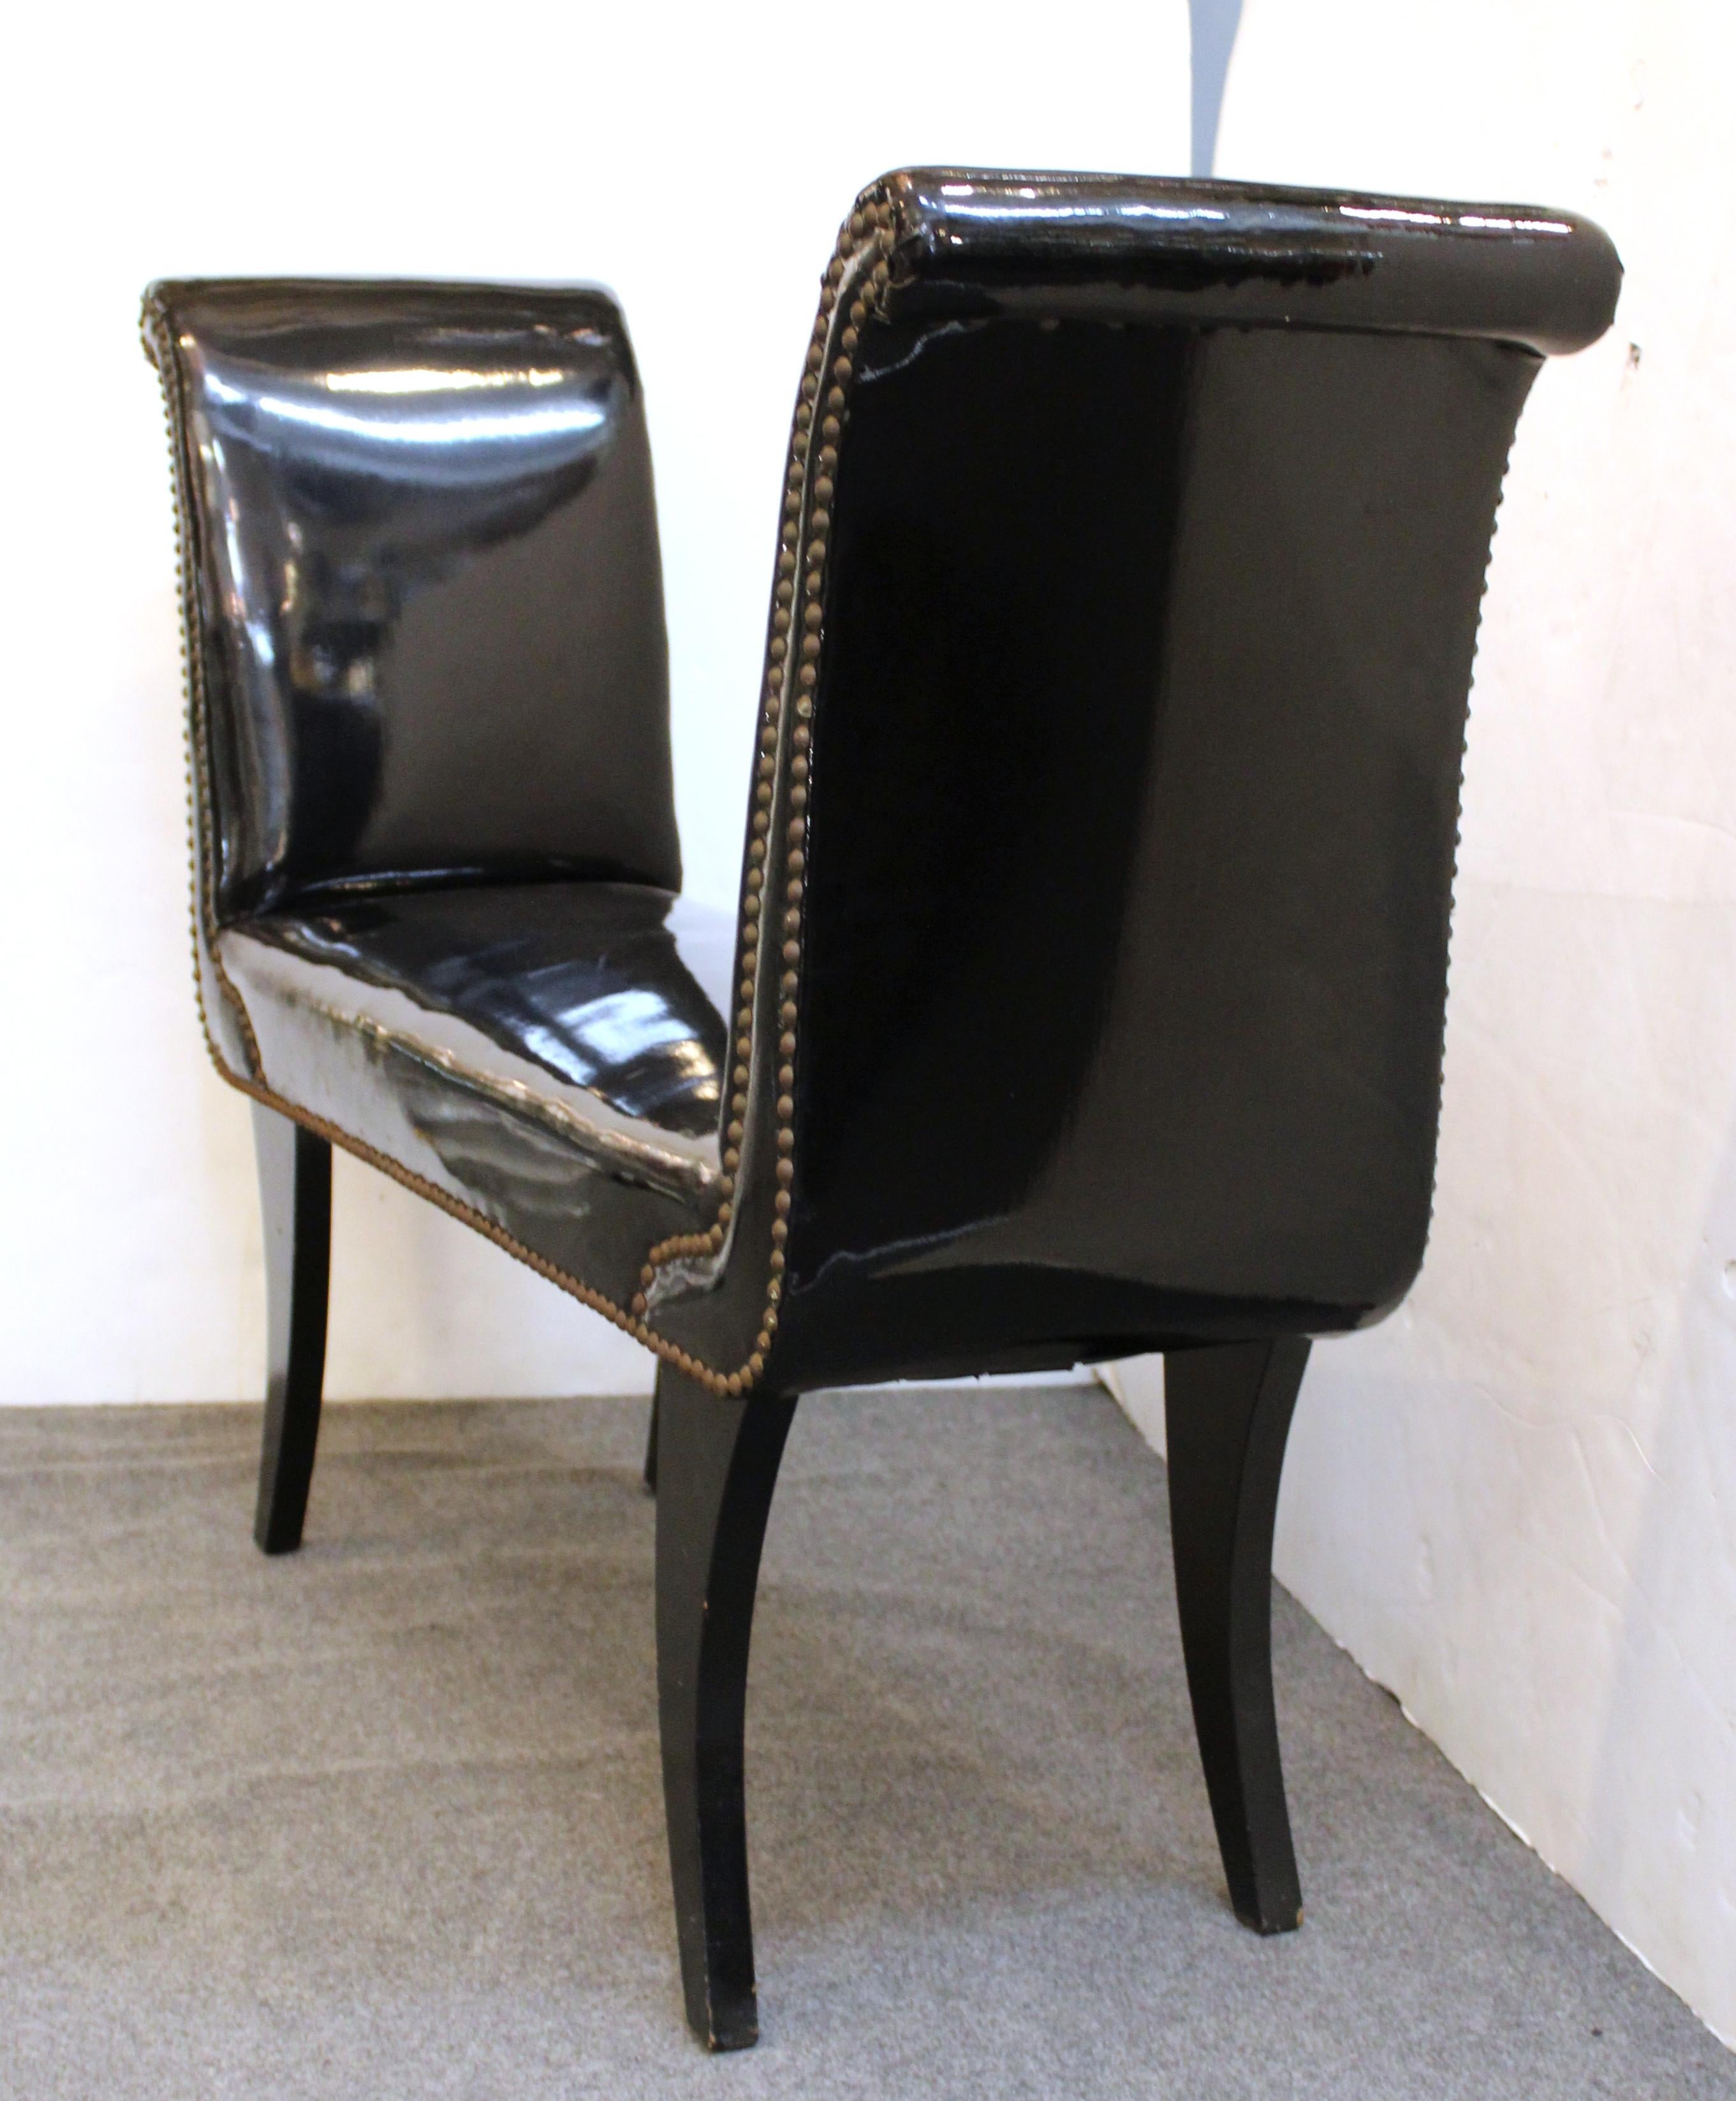 American Modern Bench in Black Faux Leather Upholstery